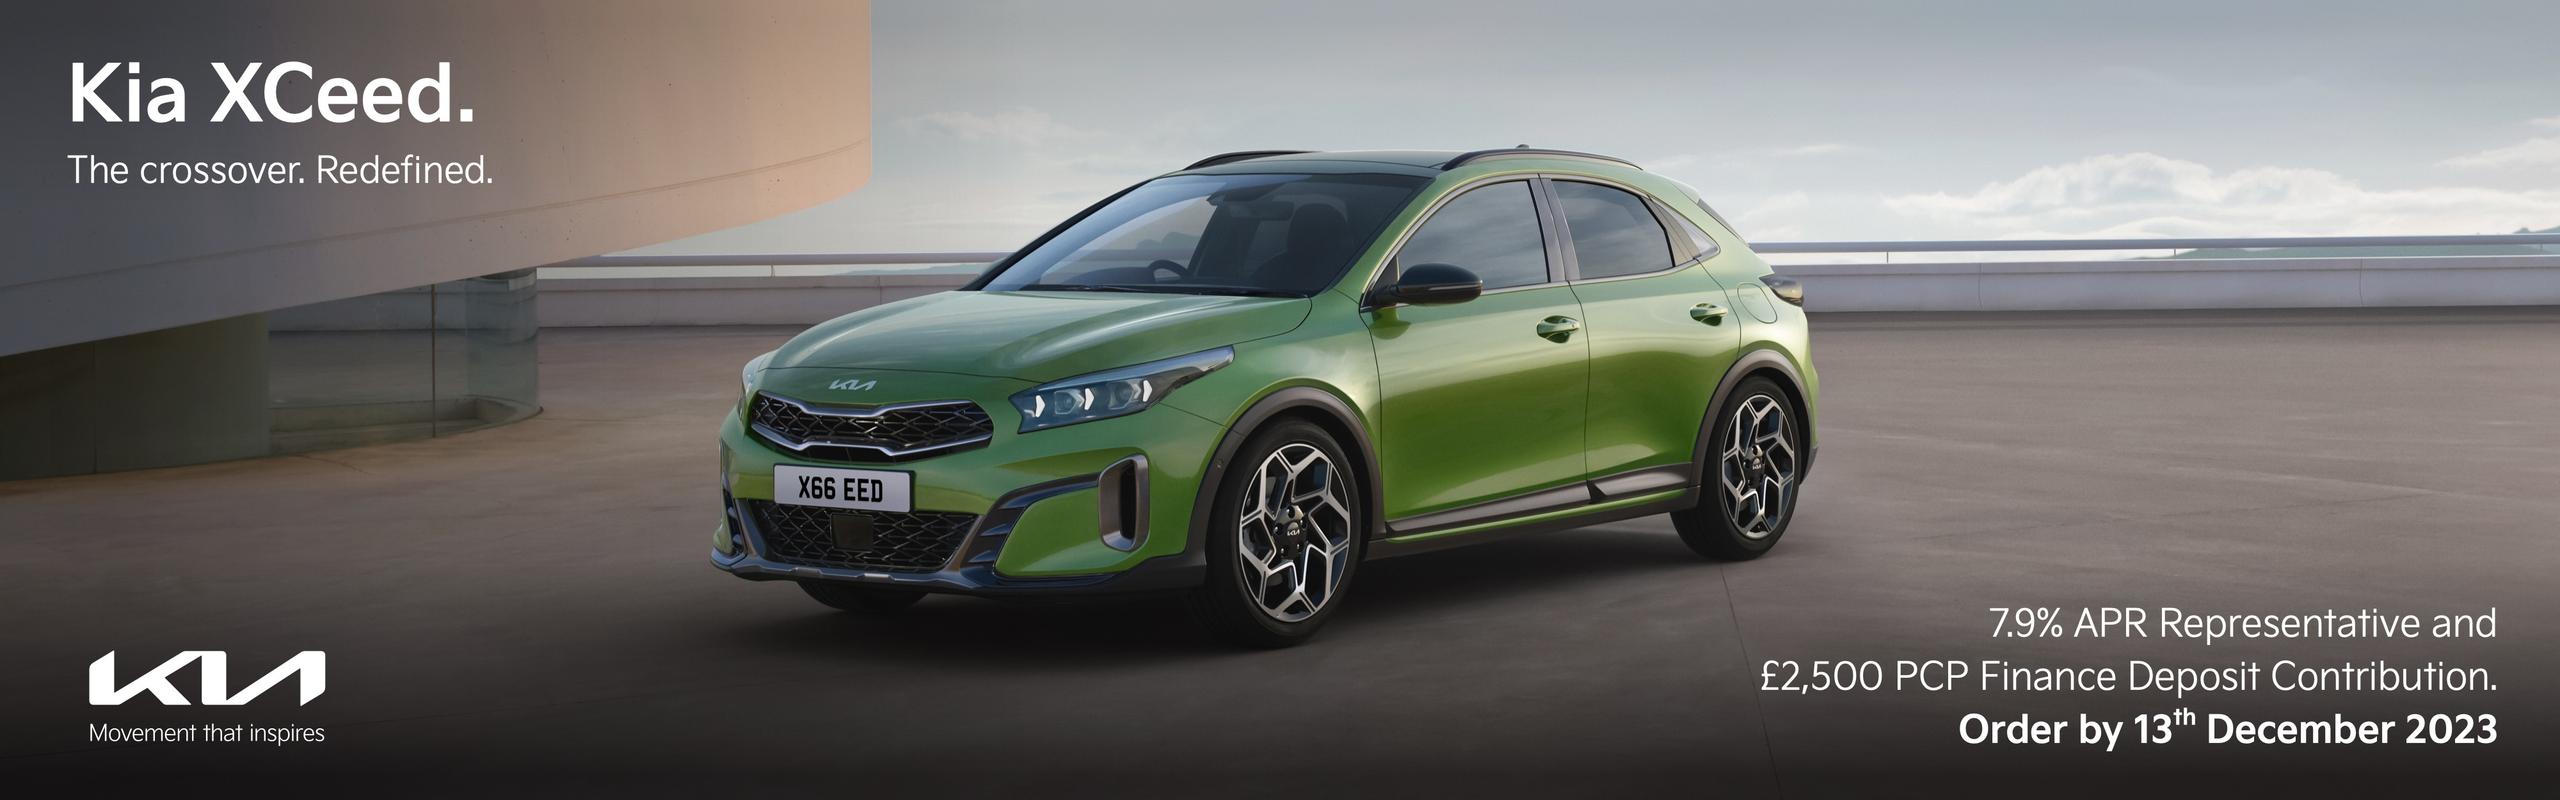 Kia XCeed. The crossover. Redefined. 7.9% APR Representative and £2,500 PCP Finance Deposit Contribution. Order by 13th December 2023.